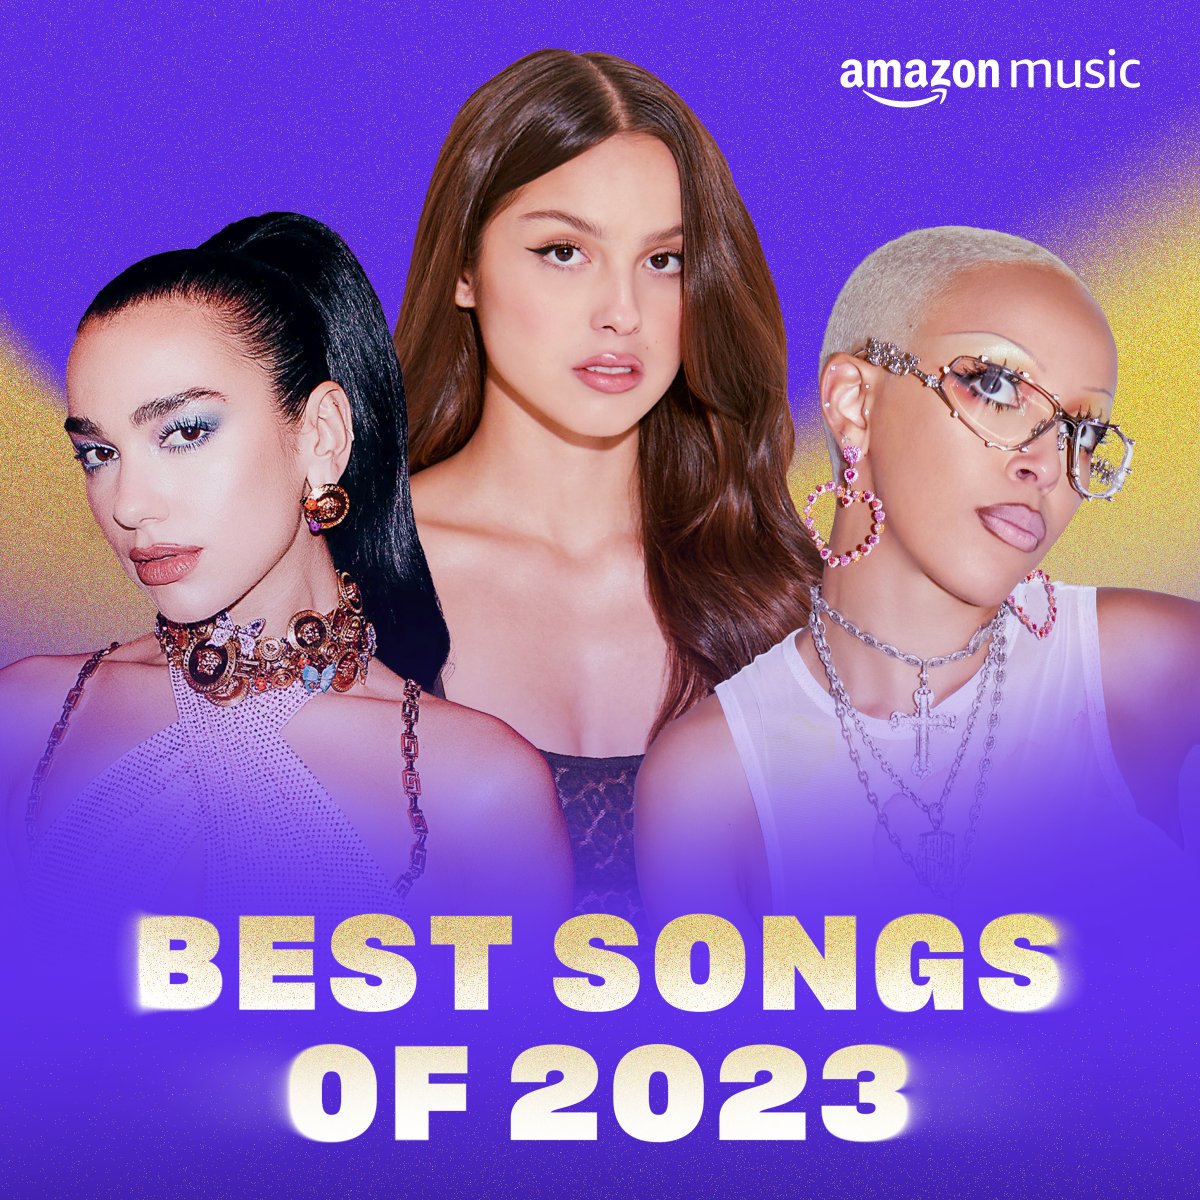 Wrap up the year with our 'Best Songs of 2023' playlist, featuring @DUALIPA, @oliviarodrigo, @DojaCat and more! amzn.to/4auQPjy